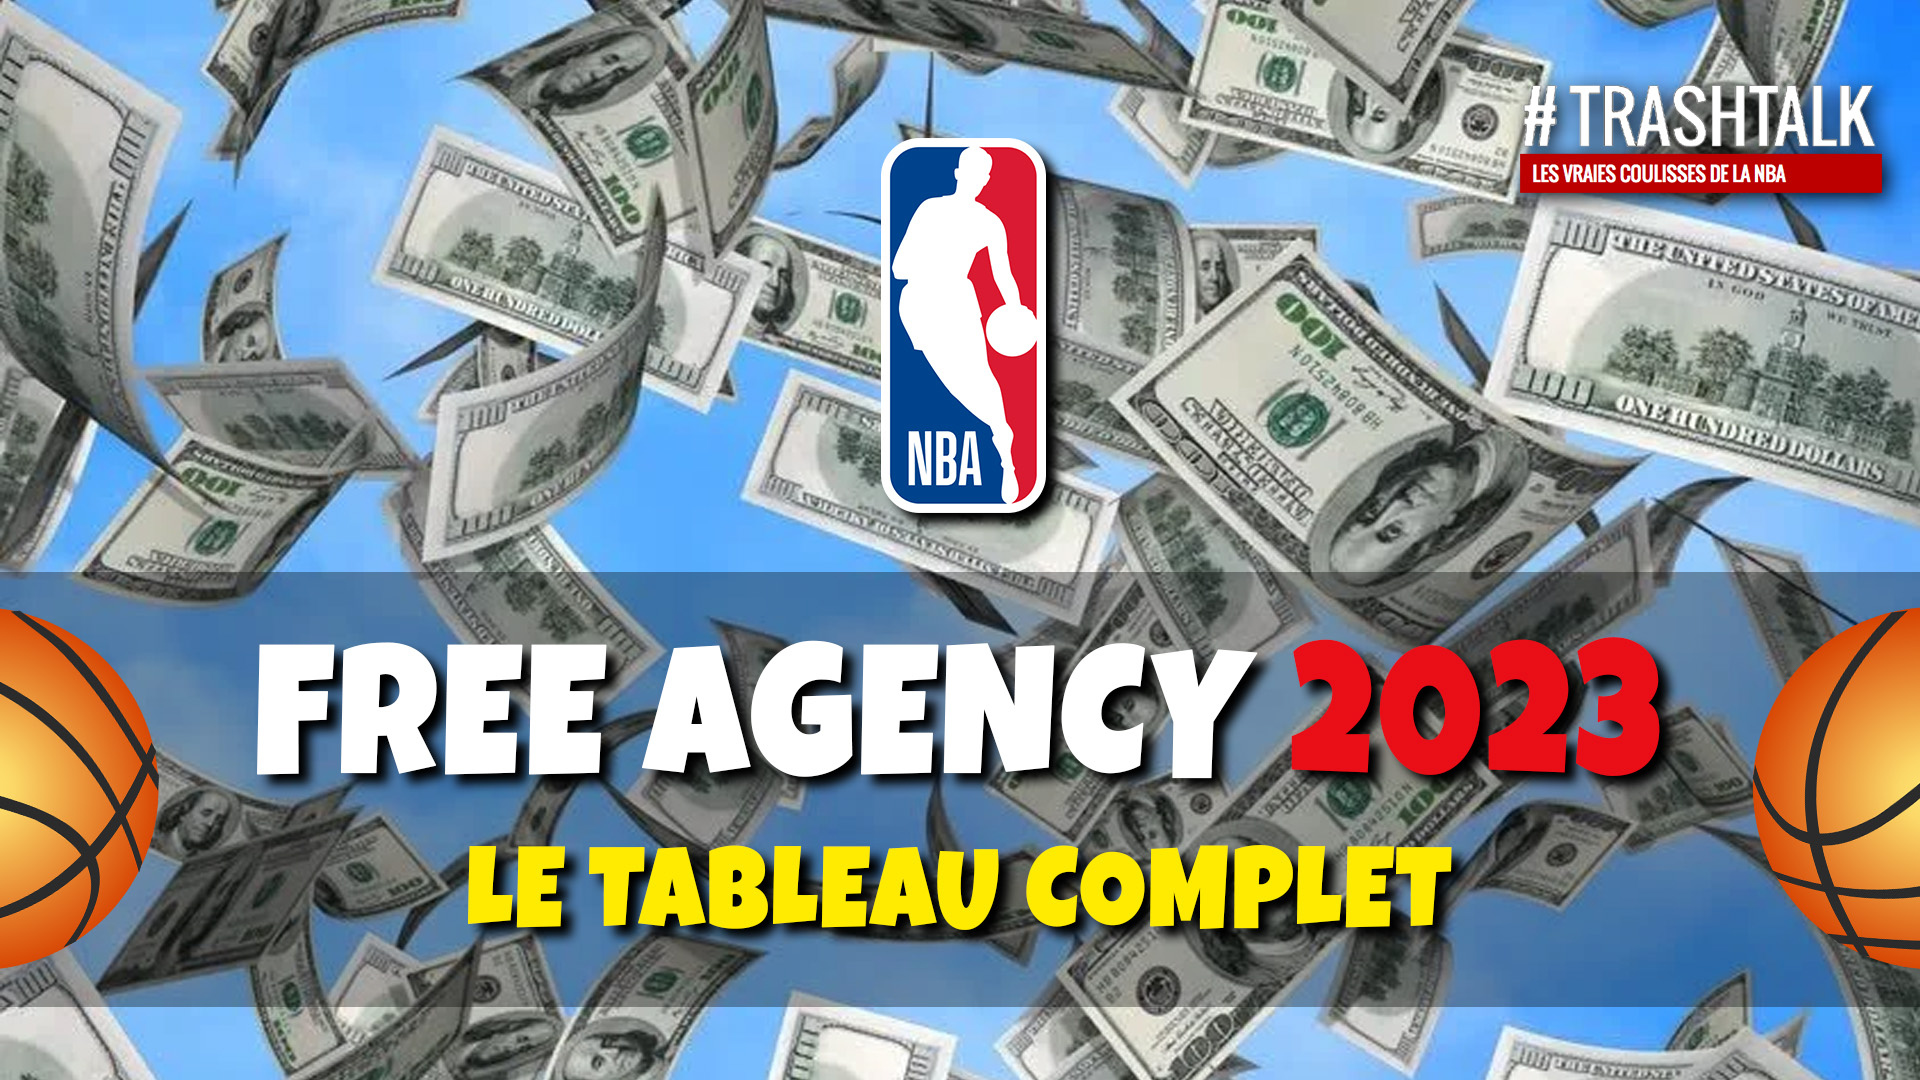 Complete List of NBA Free Agency 2023 Signings and Transfers